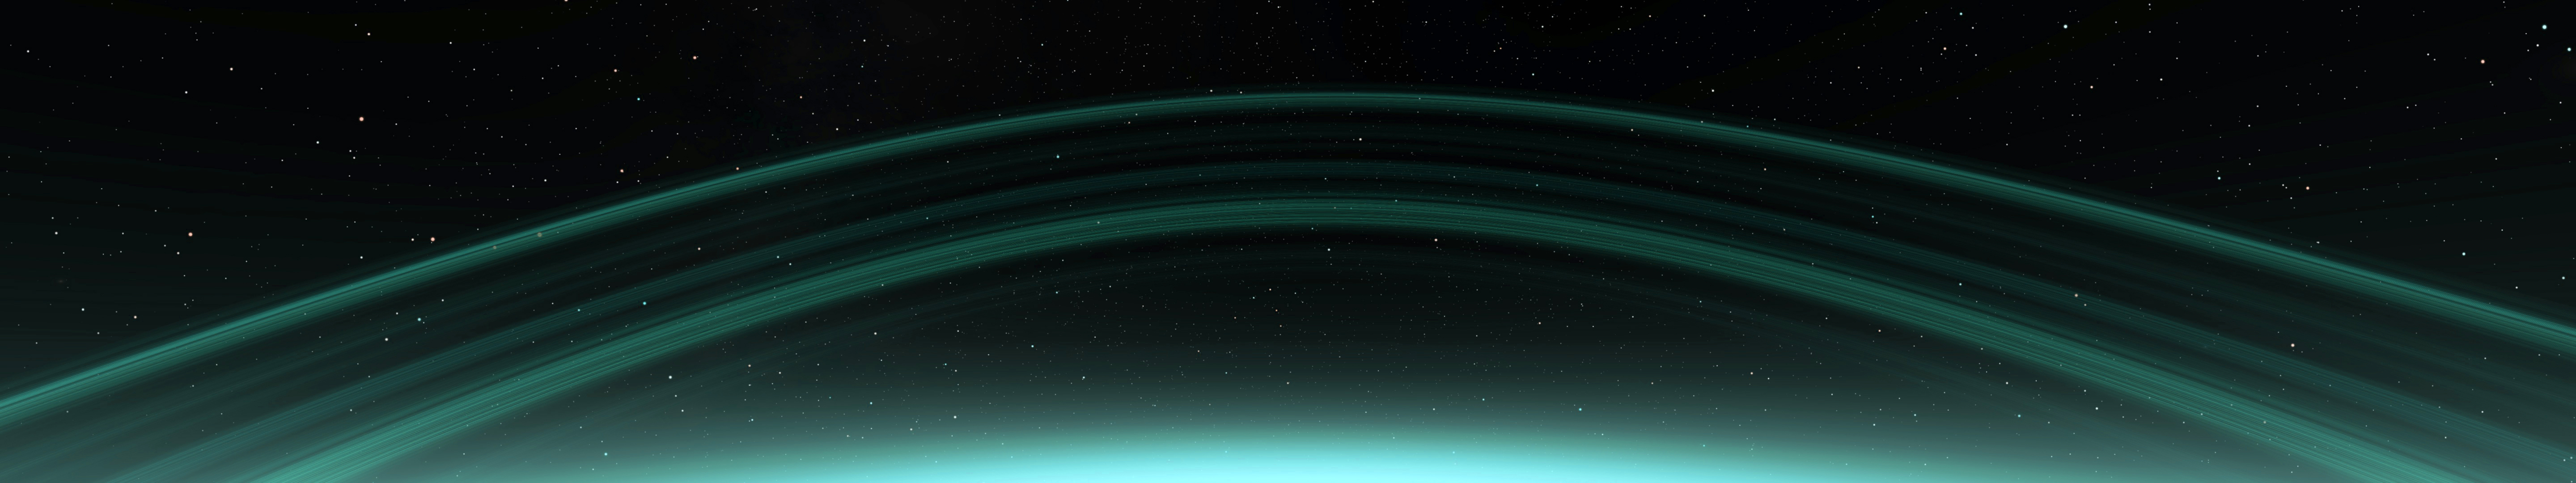 Space Engine, Planet, Planetary Rings Wallpaper